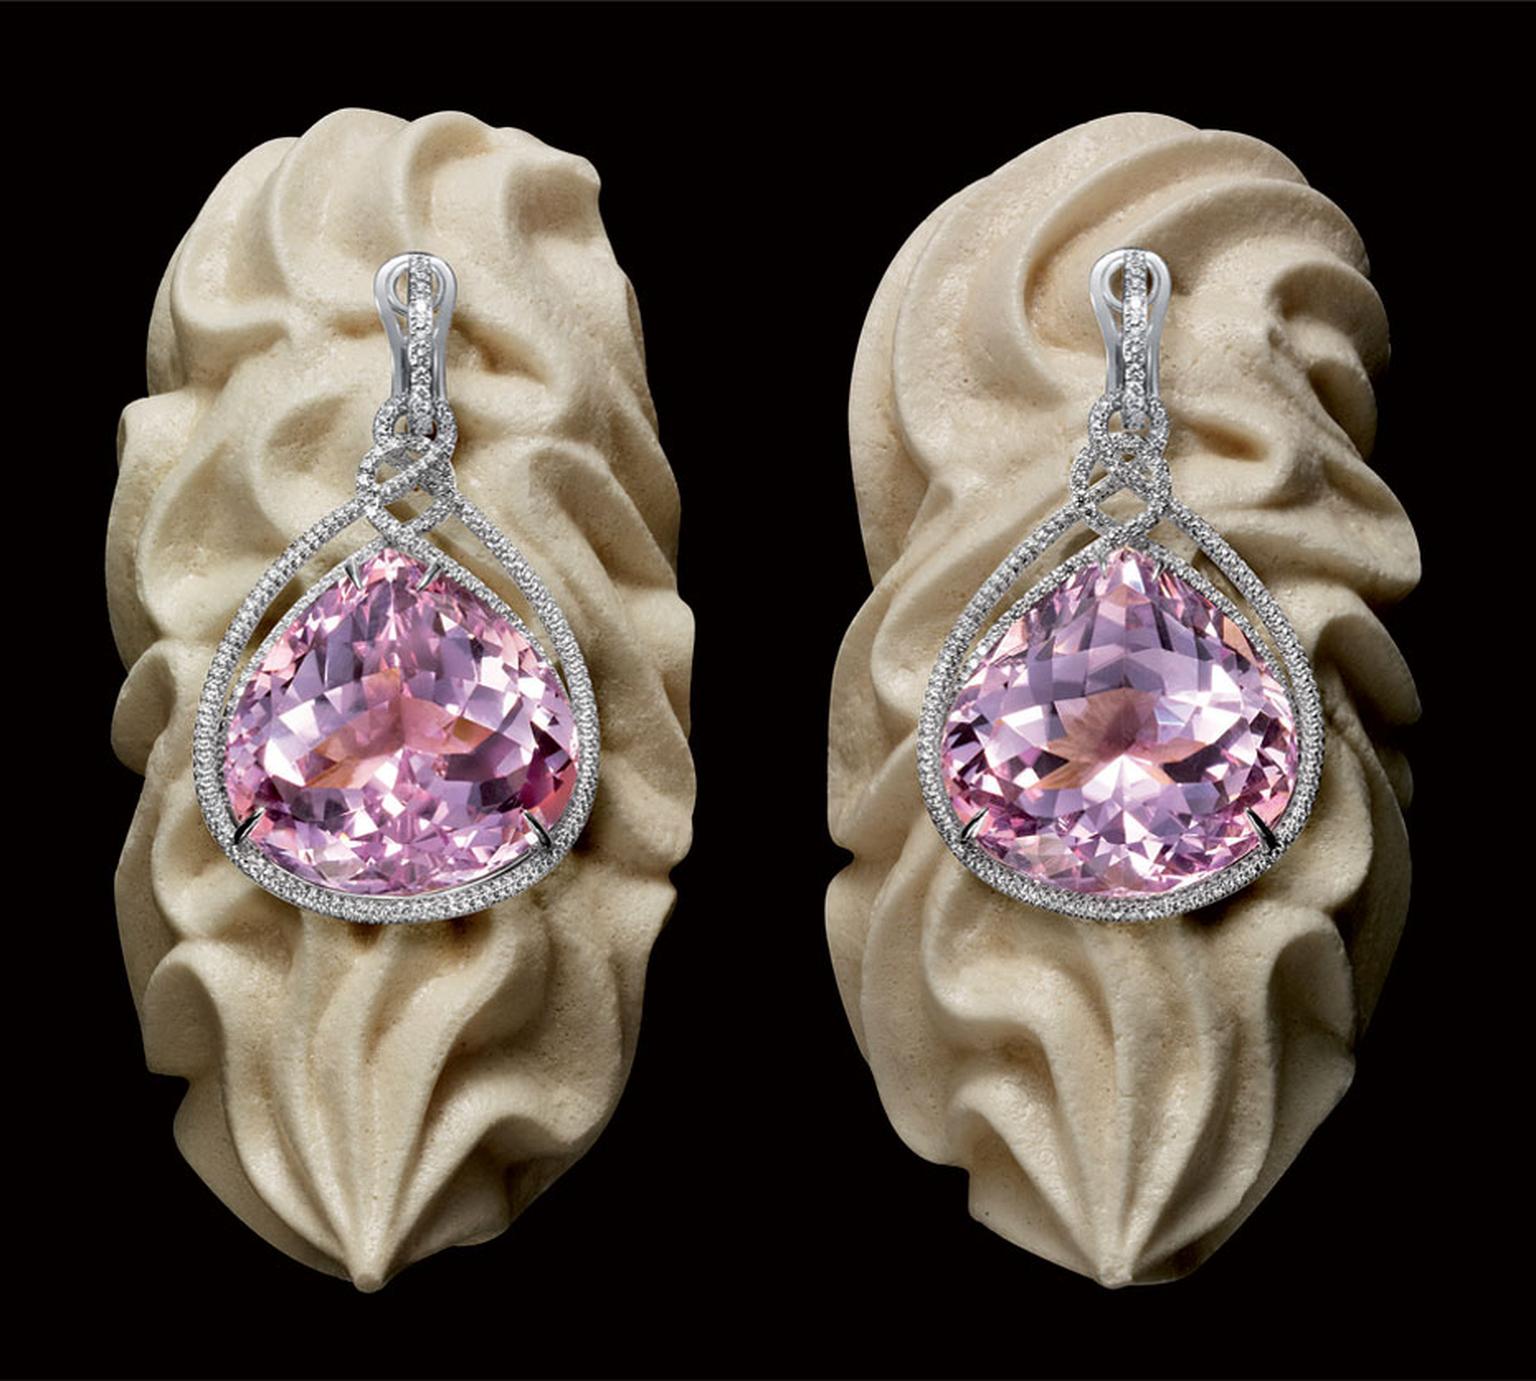 Chopard Chocolate Temptations Earrings from the Temptations collection, adorned with two pear shaped kunzites, paved with brilliant cut diamonds and set in white gold POA